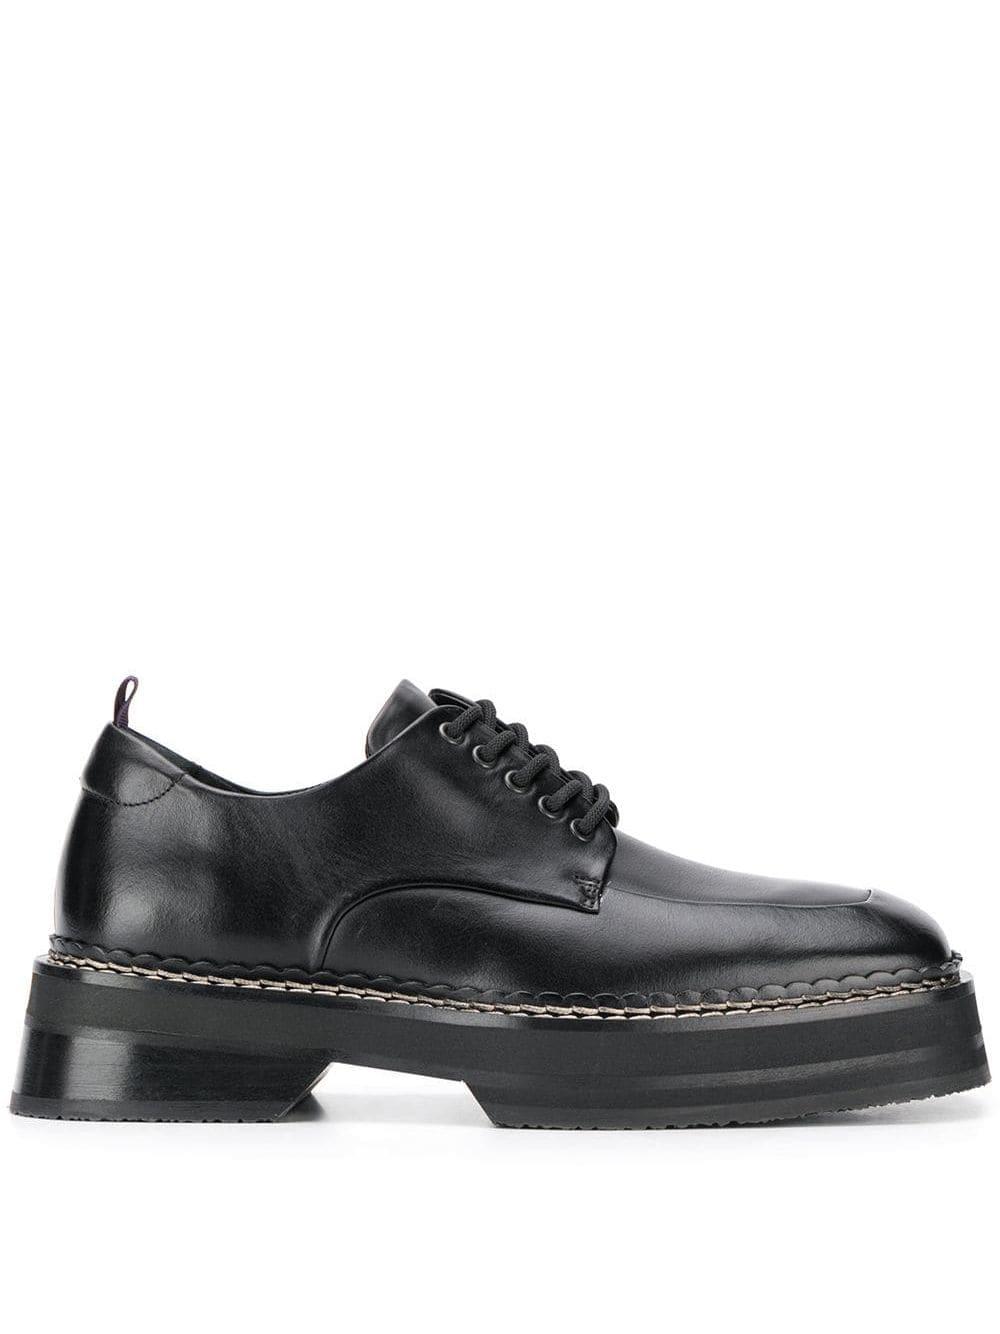 Eytys Leather Phoenix Derby Shoes in Black for Men - Lyst